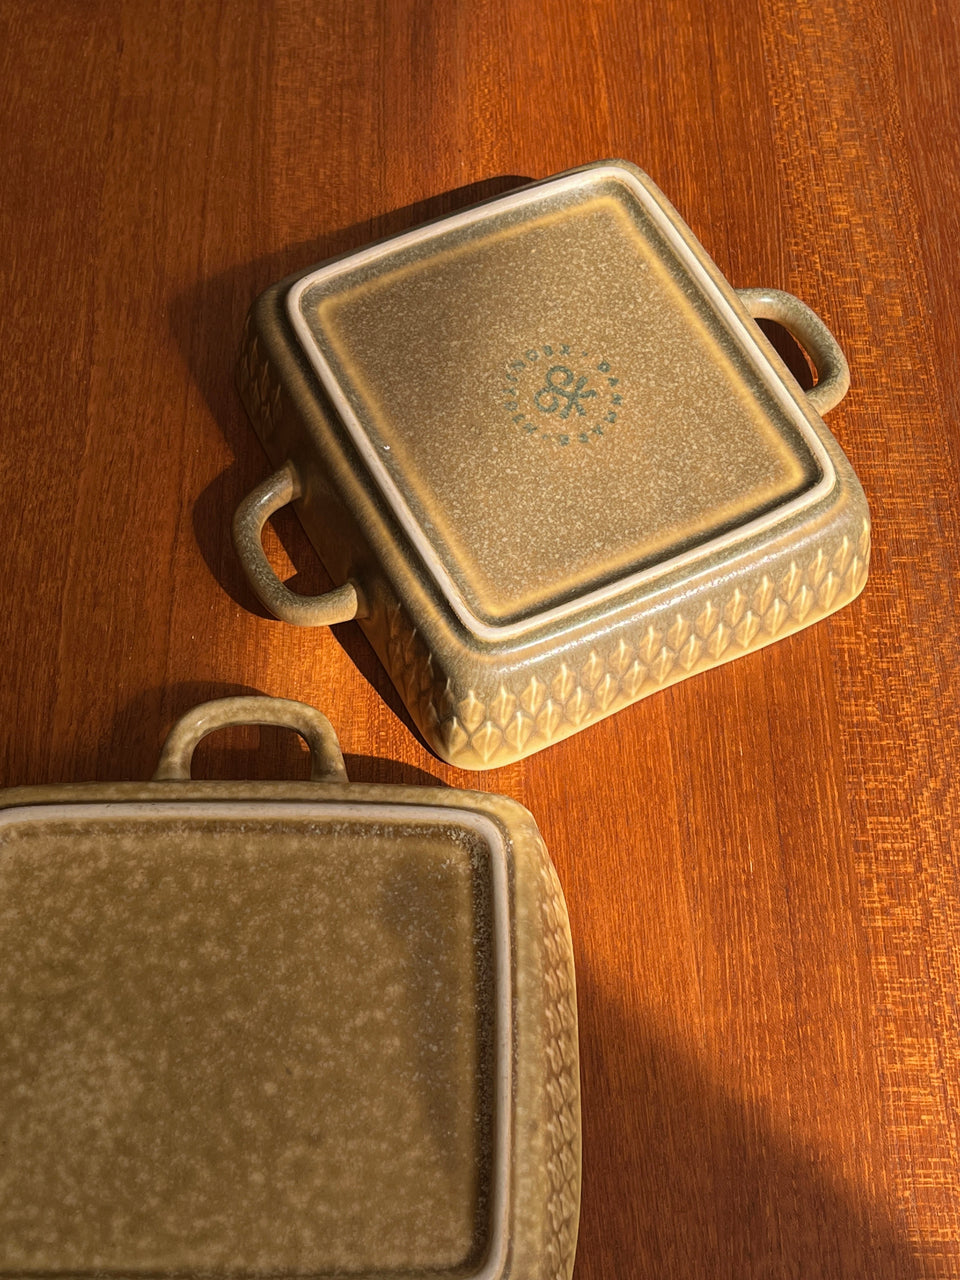 Kronjyden Relief Square Dish with Handle Jens H.Quistgaard/クロニーデン レリーフ スクエアディッシュ 角皿 クイストゴー 北欧ヴィンテージ食器